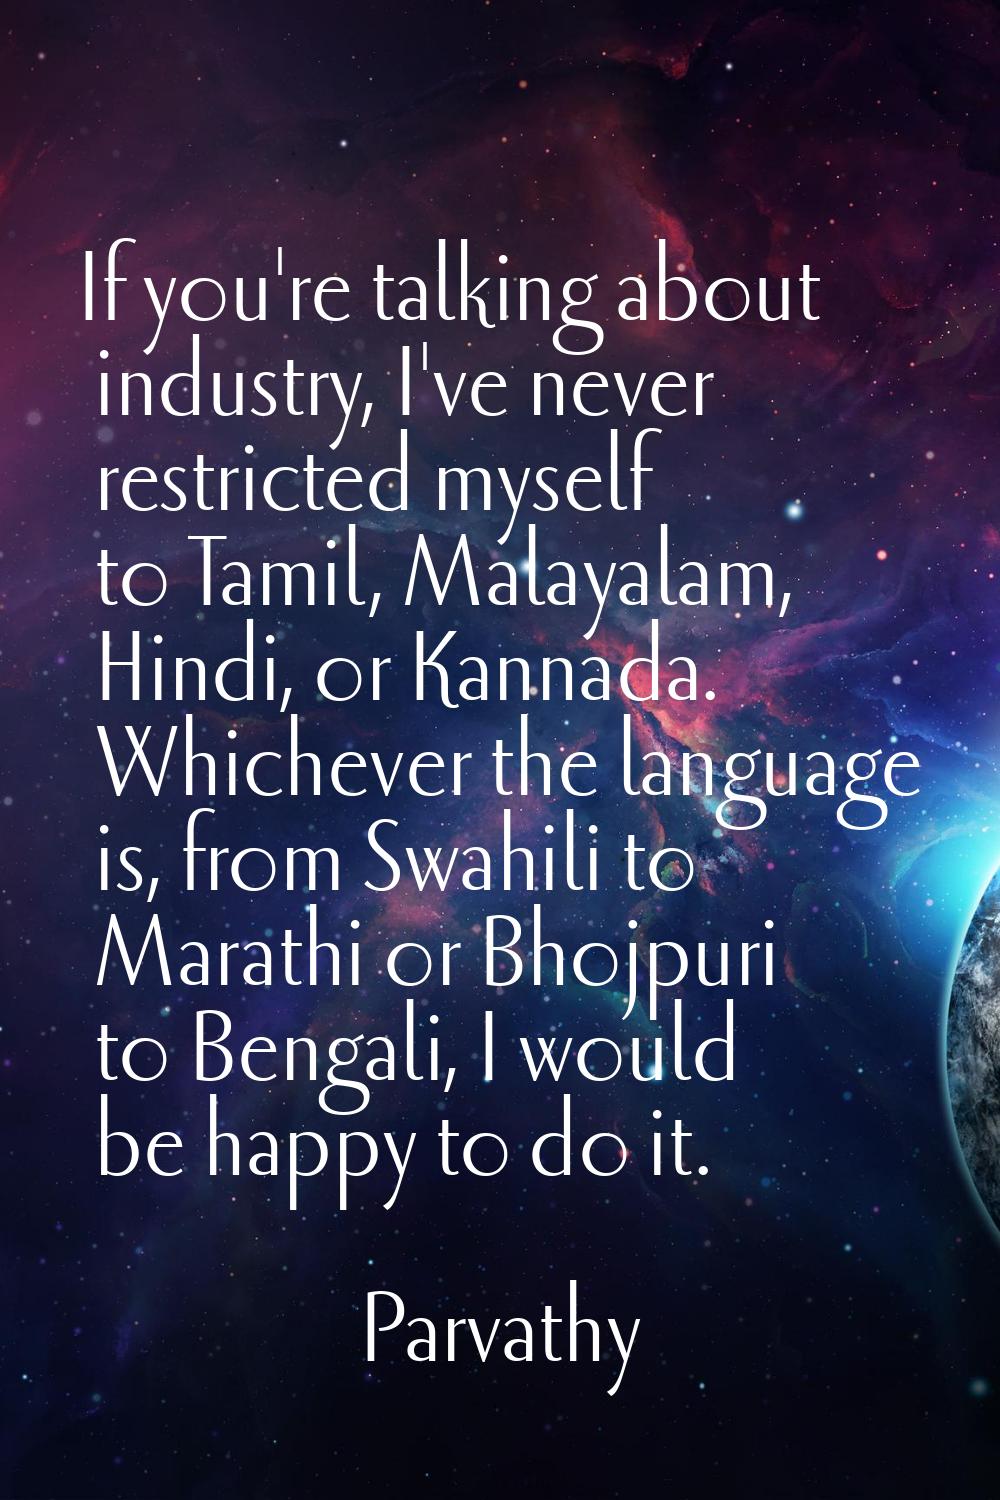 If you're talking about industry, I've never restricted myself to Tamil, Malayalam, Hindi, or Kanna